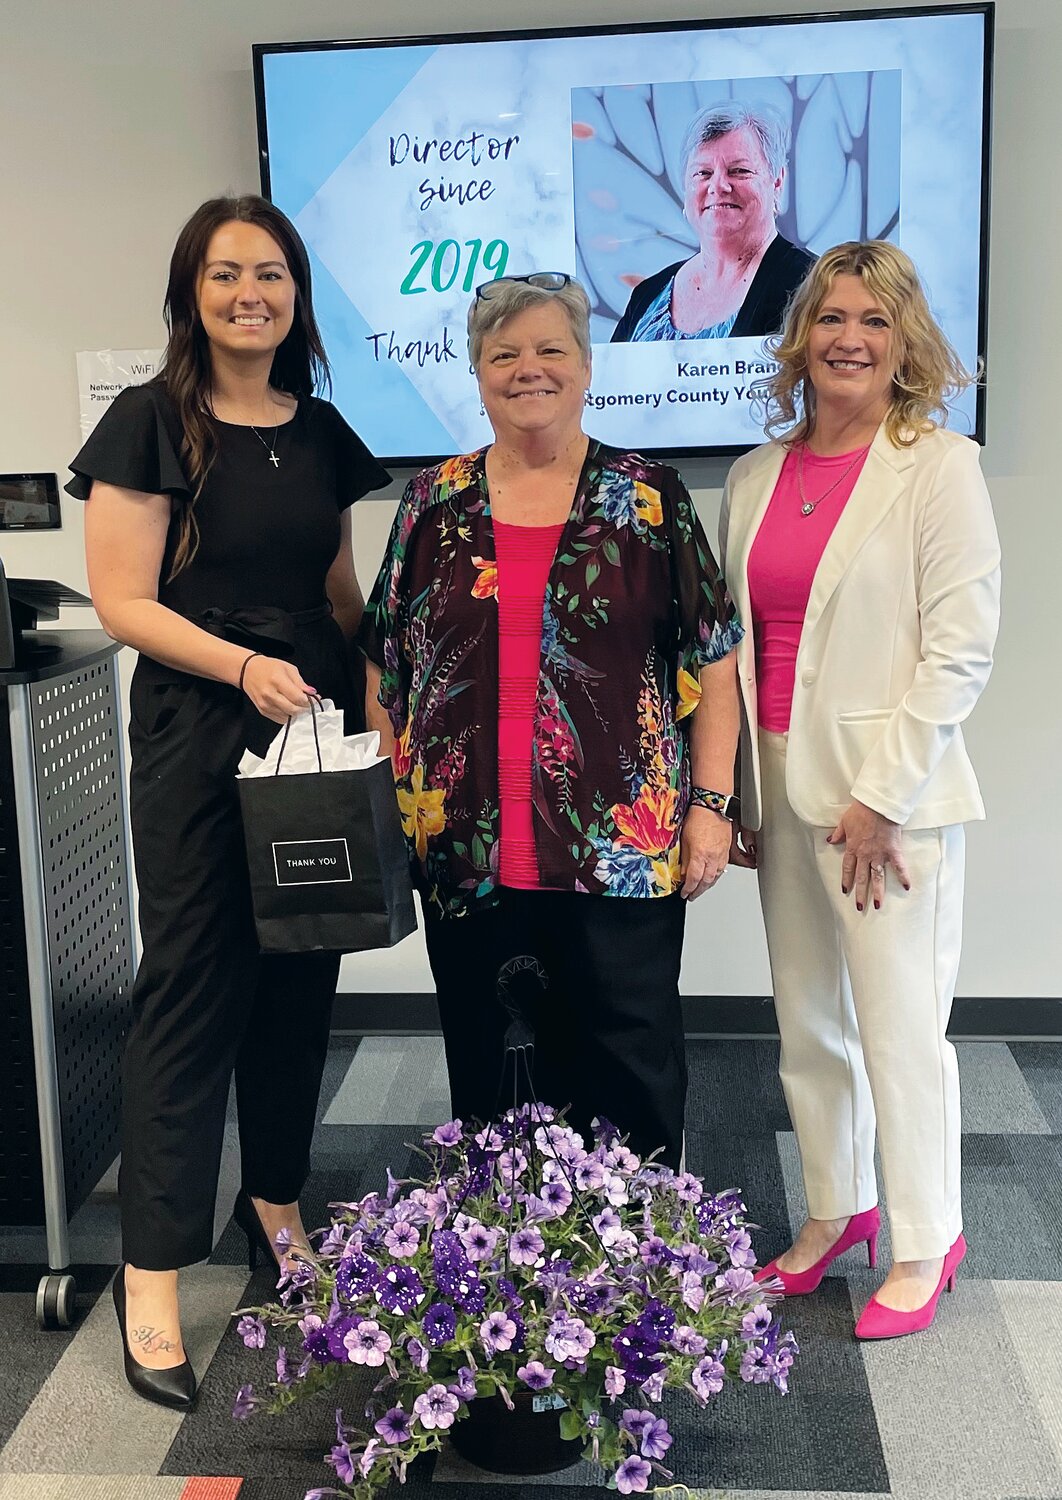 Karen Branch, center, was recognized for completing the term limit as a board director, having served since 2019. She is pictured with KyLee Risner, left, and Stacy Sommer.